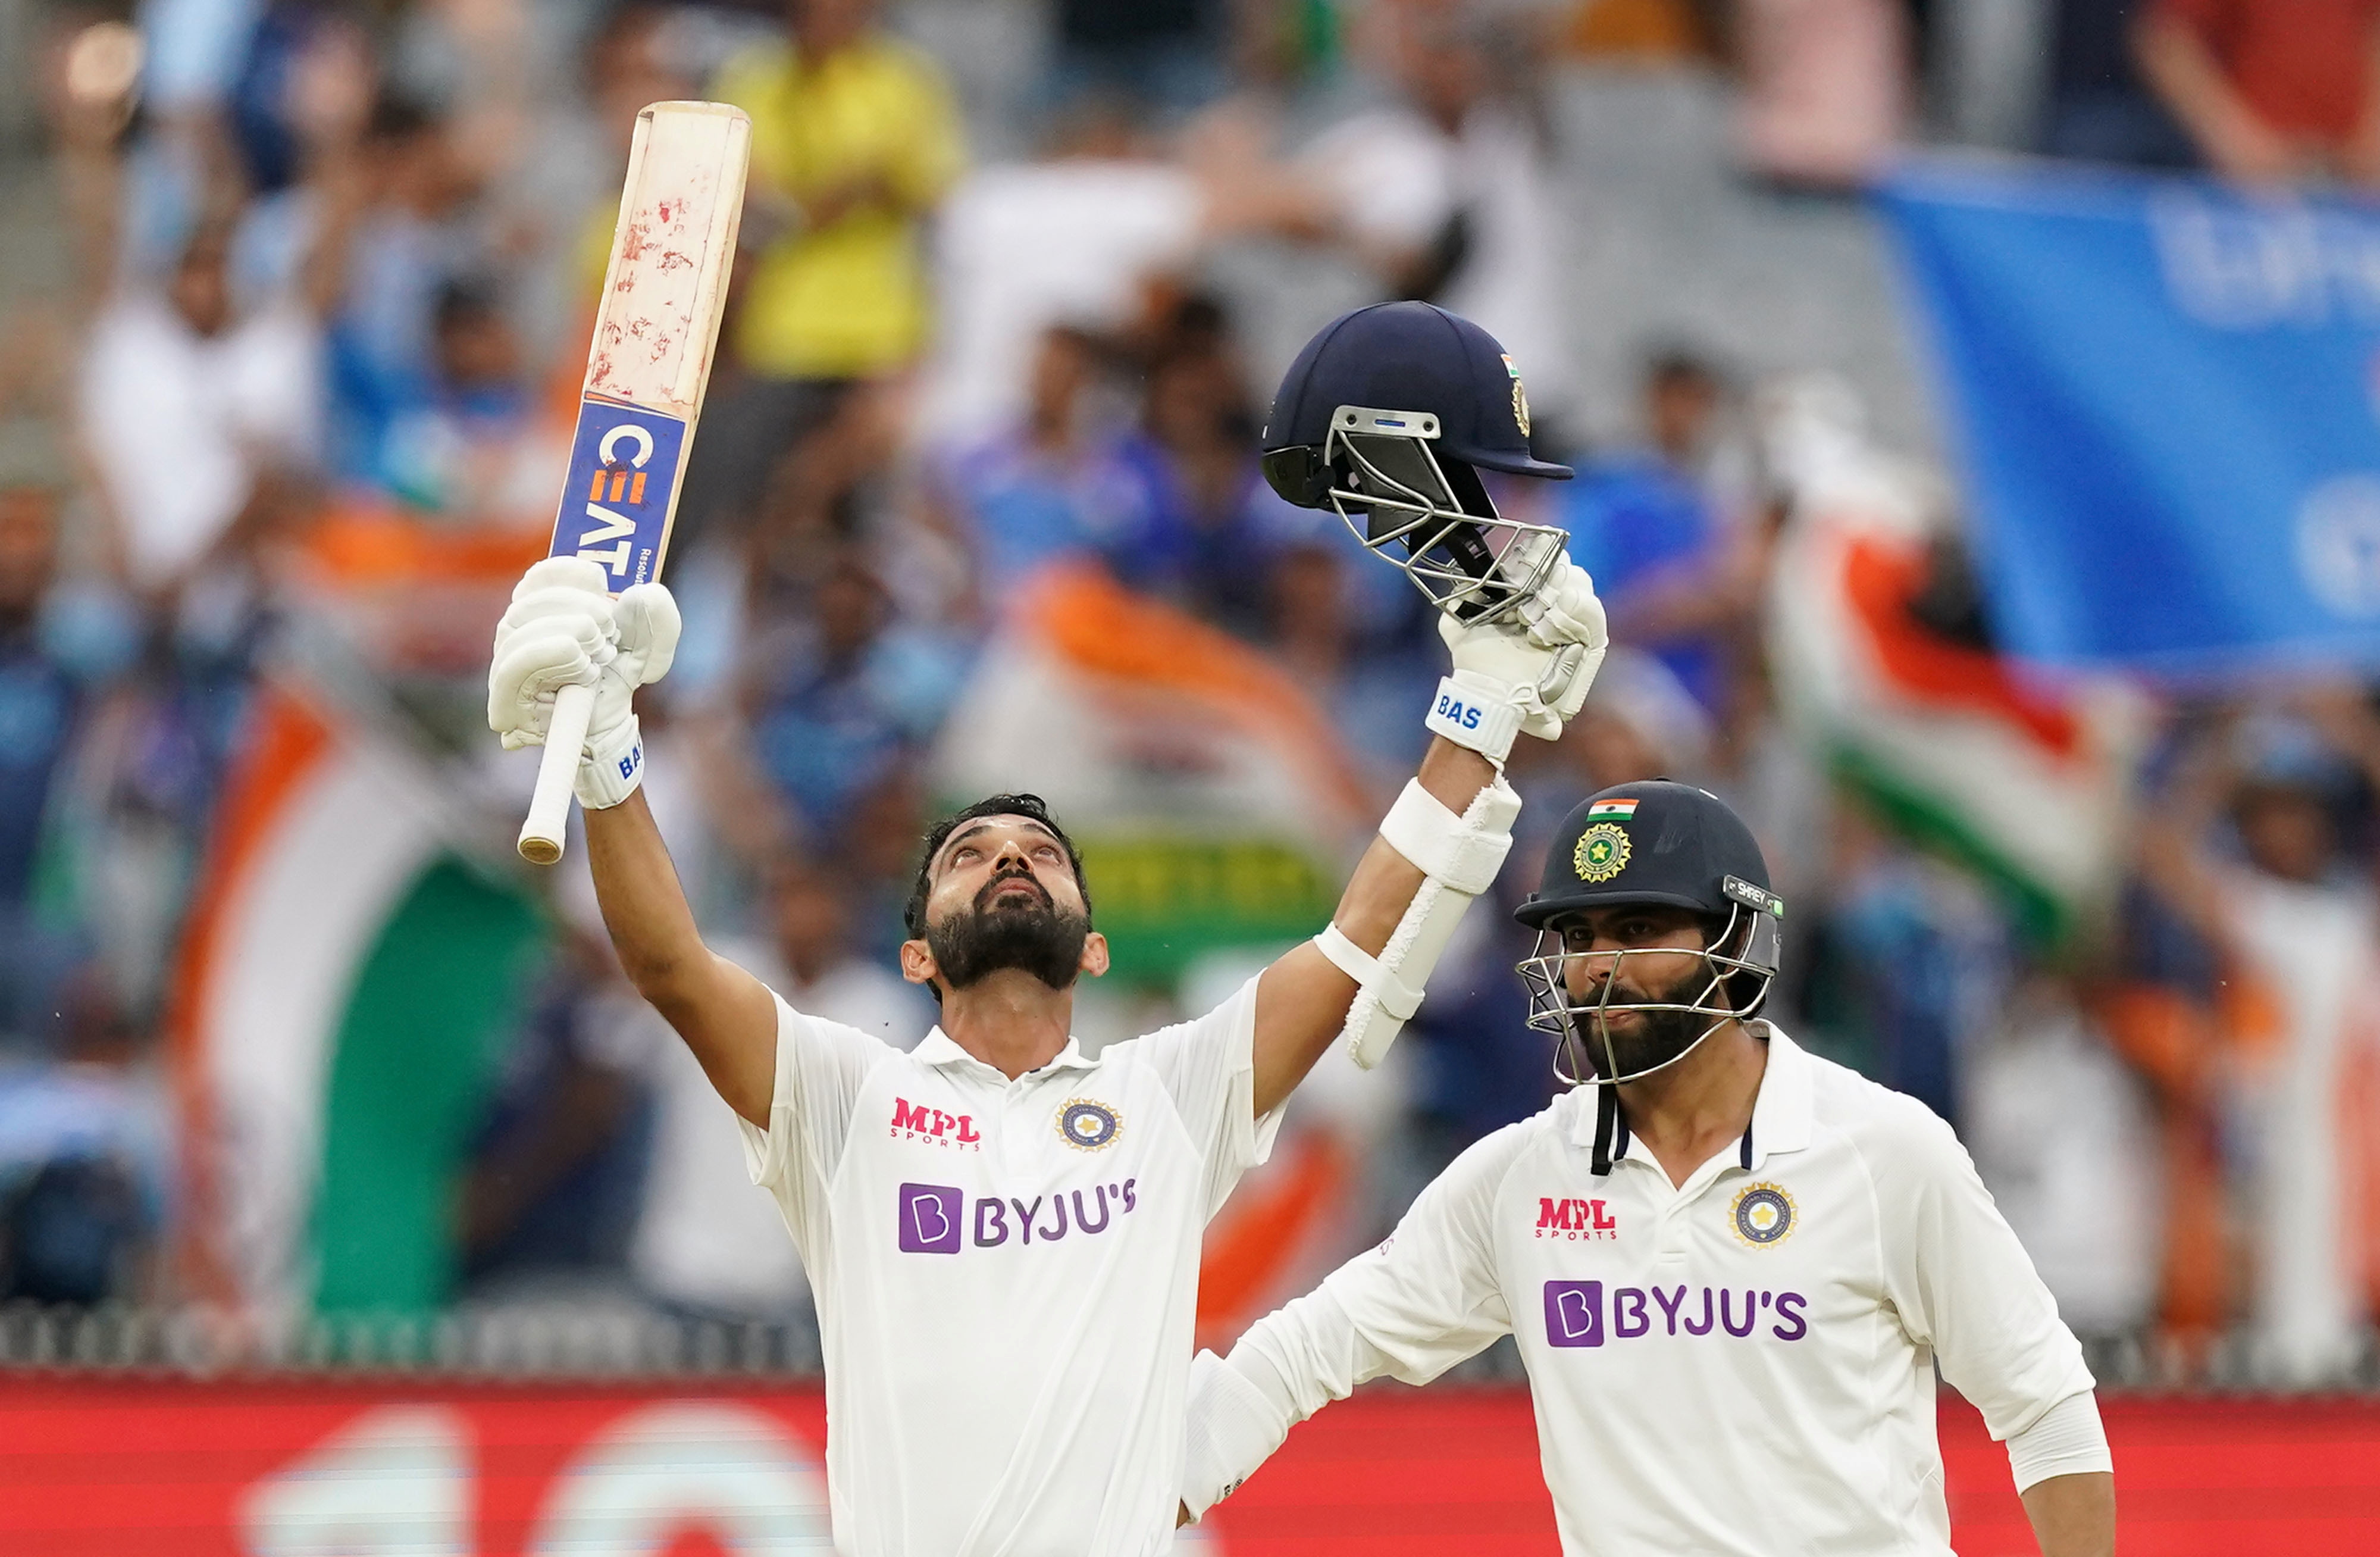 India's Ajinkya Rahane celebrates after reaching his century as his teammate Ravindra Jadeja looks on during day two of the second test match between Australia and India at The MCG, Melbourne, Australia, December 27, 2020. Photo: Reuters